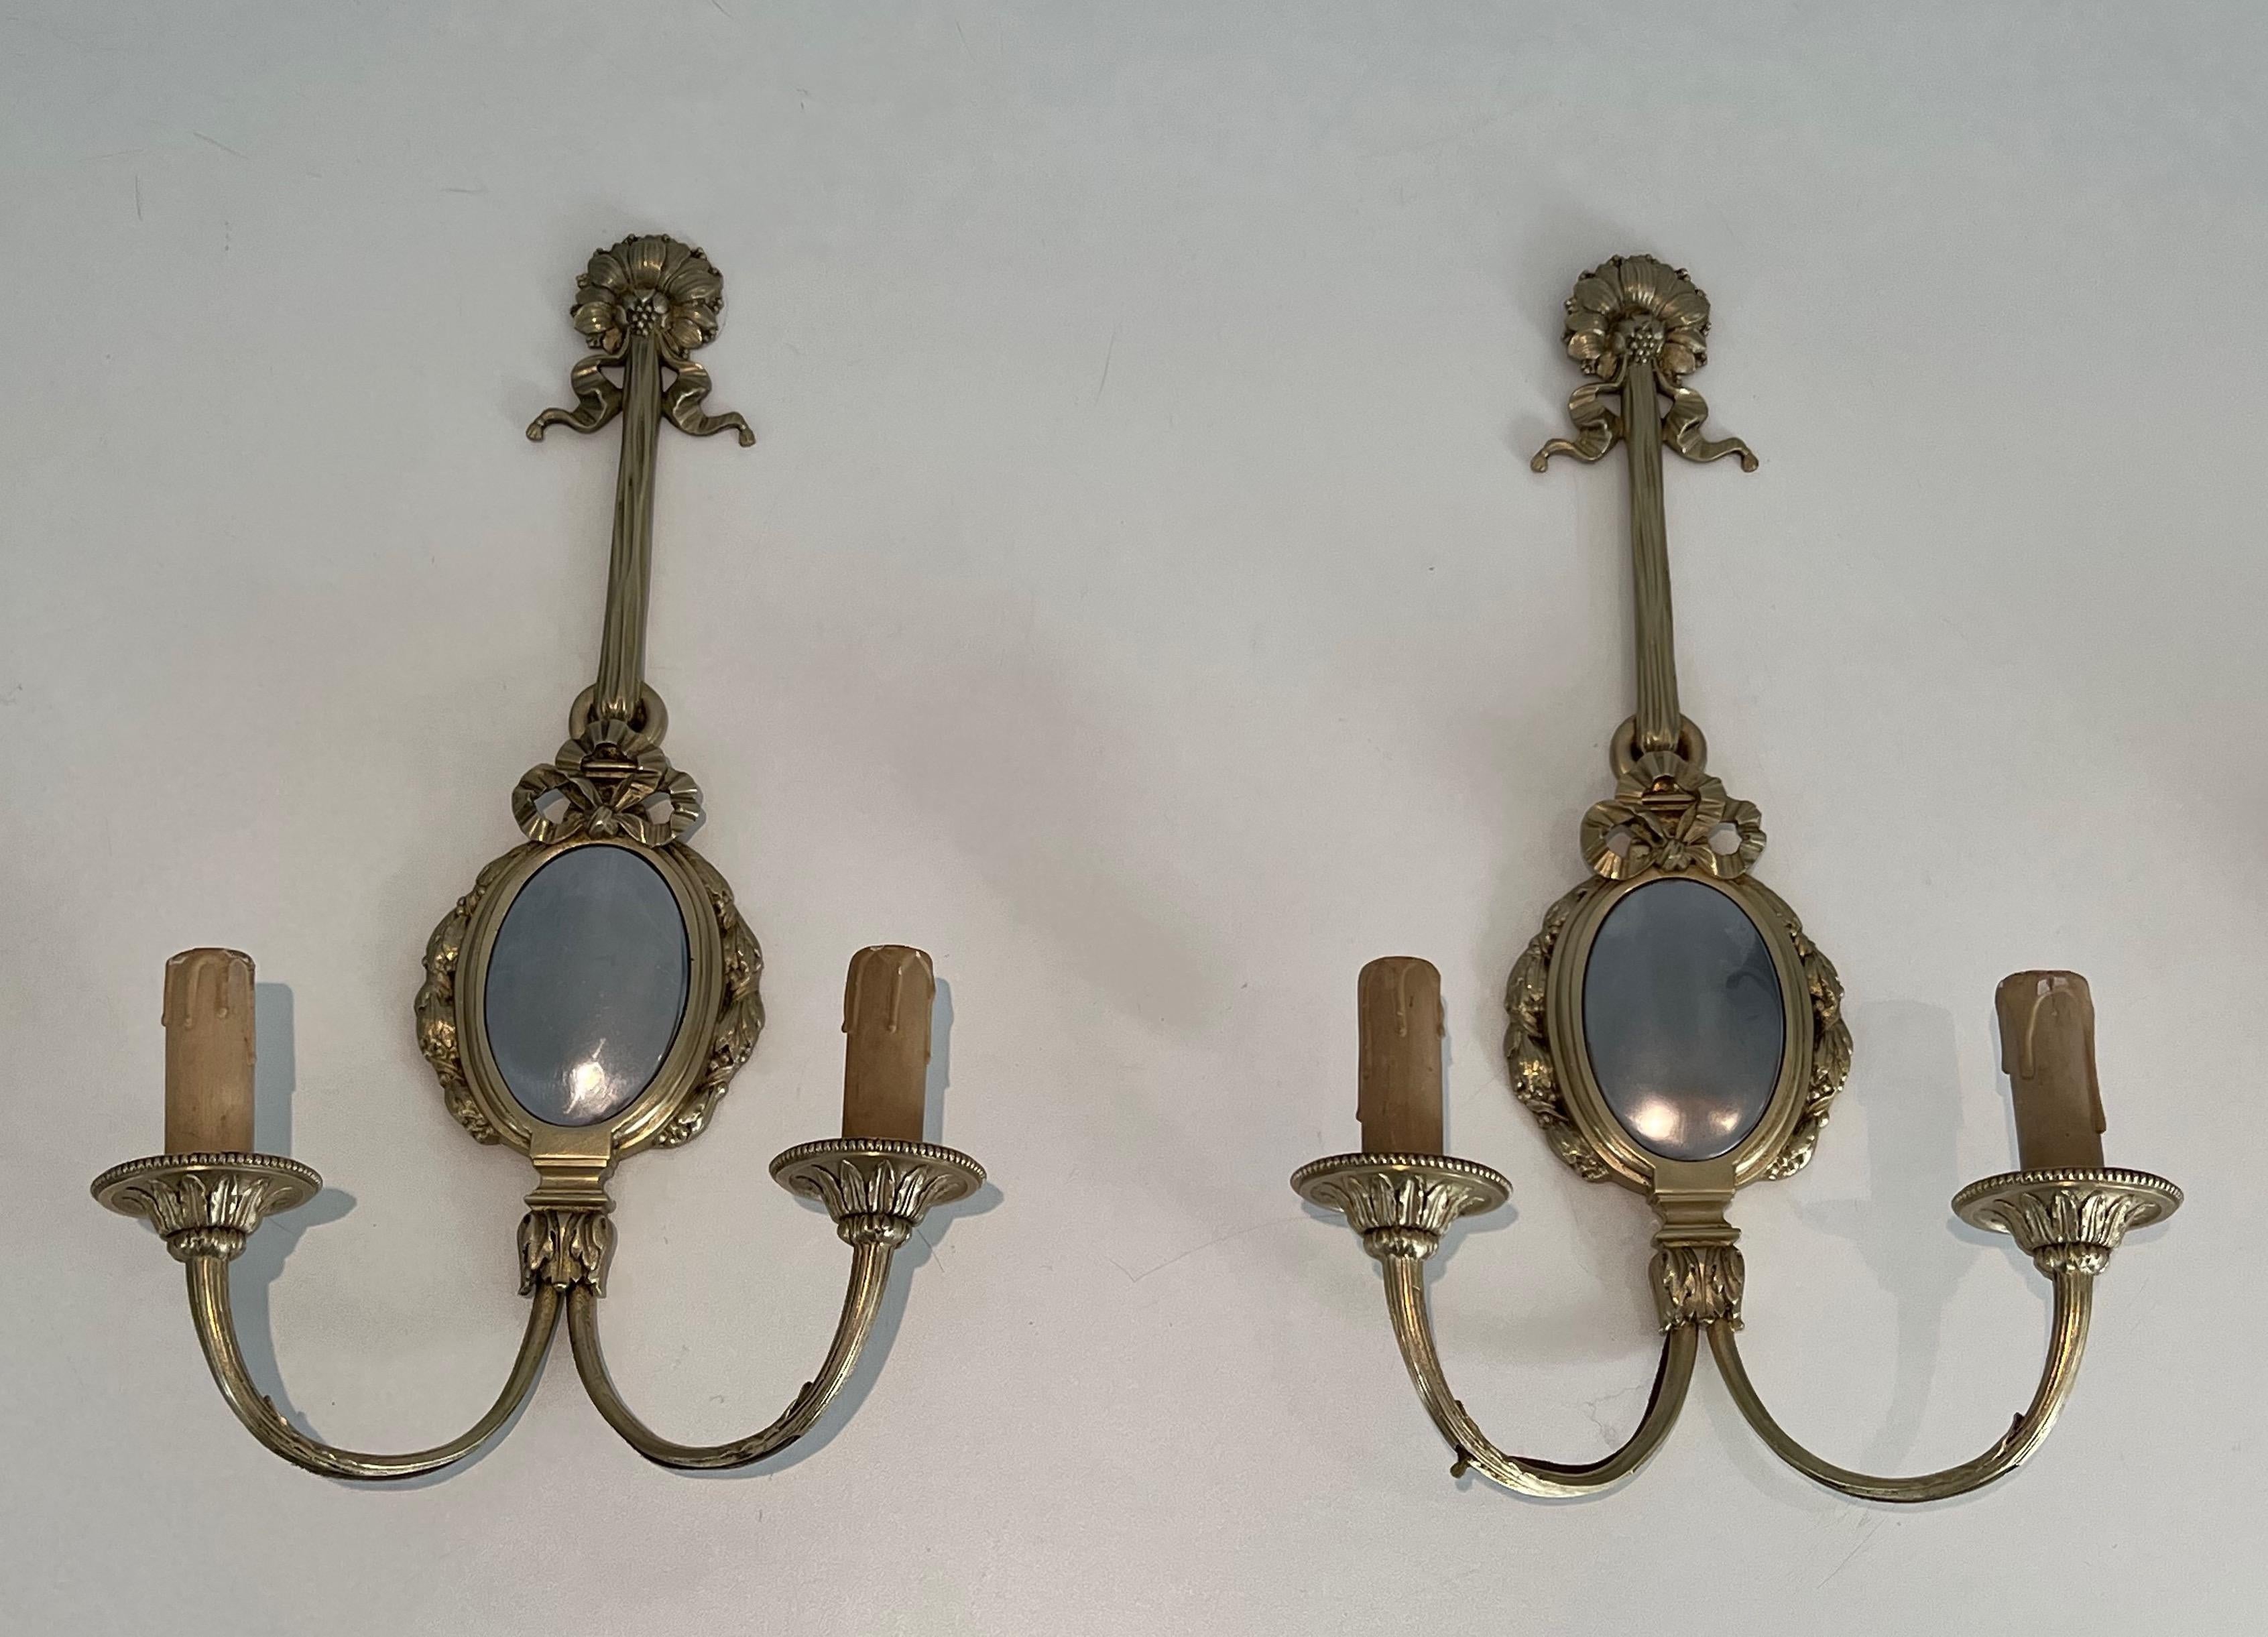 This set of 4 Louis the 16th style wall sconces is made of chiseled bronze decorated with bows and ribbon and comprising a domed oval part in chrome. This is a French work, circa 1930.